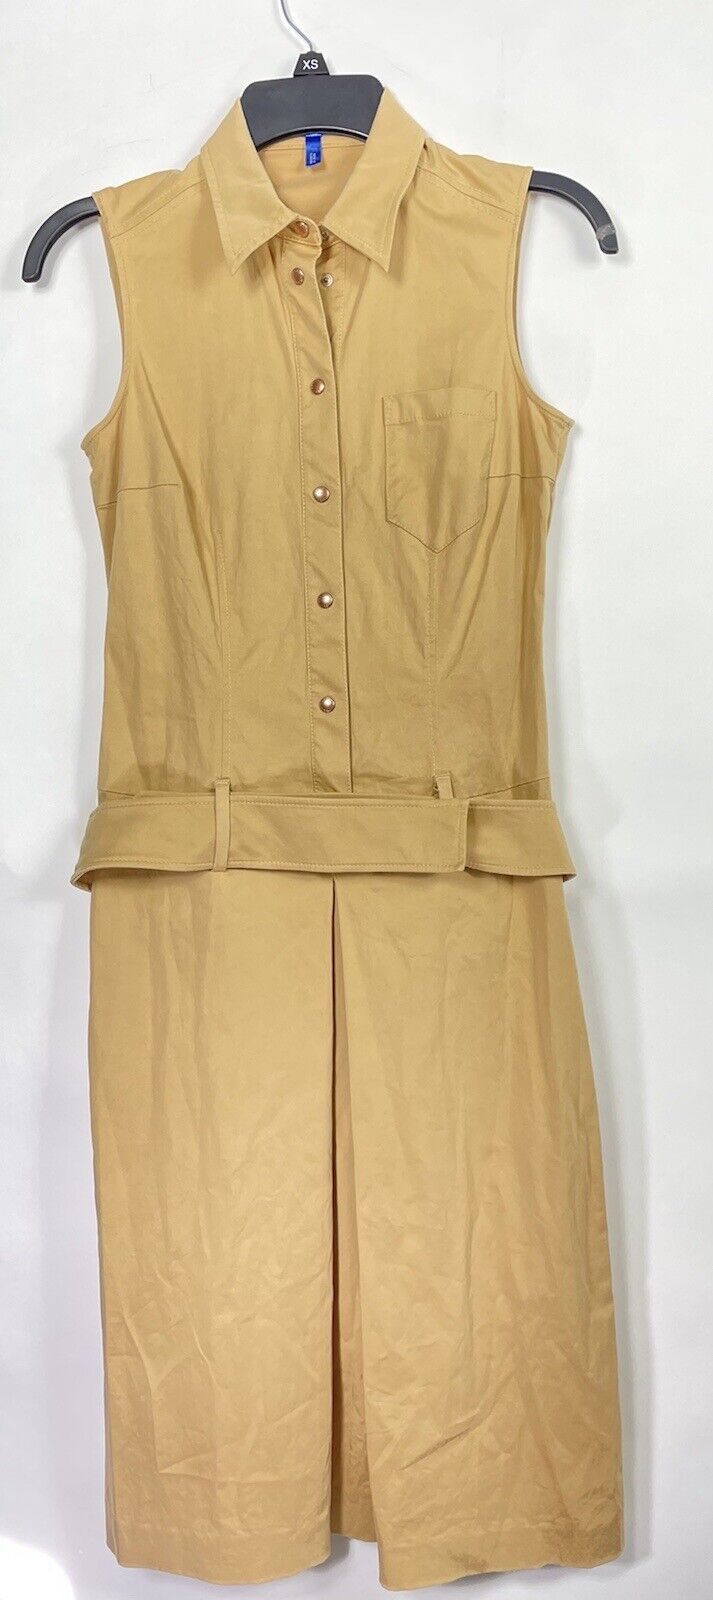 NWOT Escada Sport Belted Trench Coat Dress 34 EU 4 US Beige and Brown Sleeveless